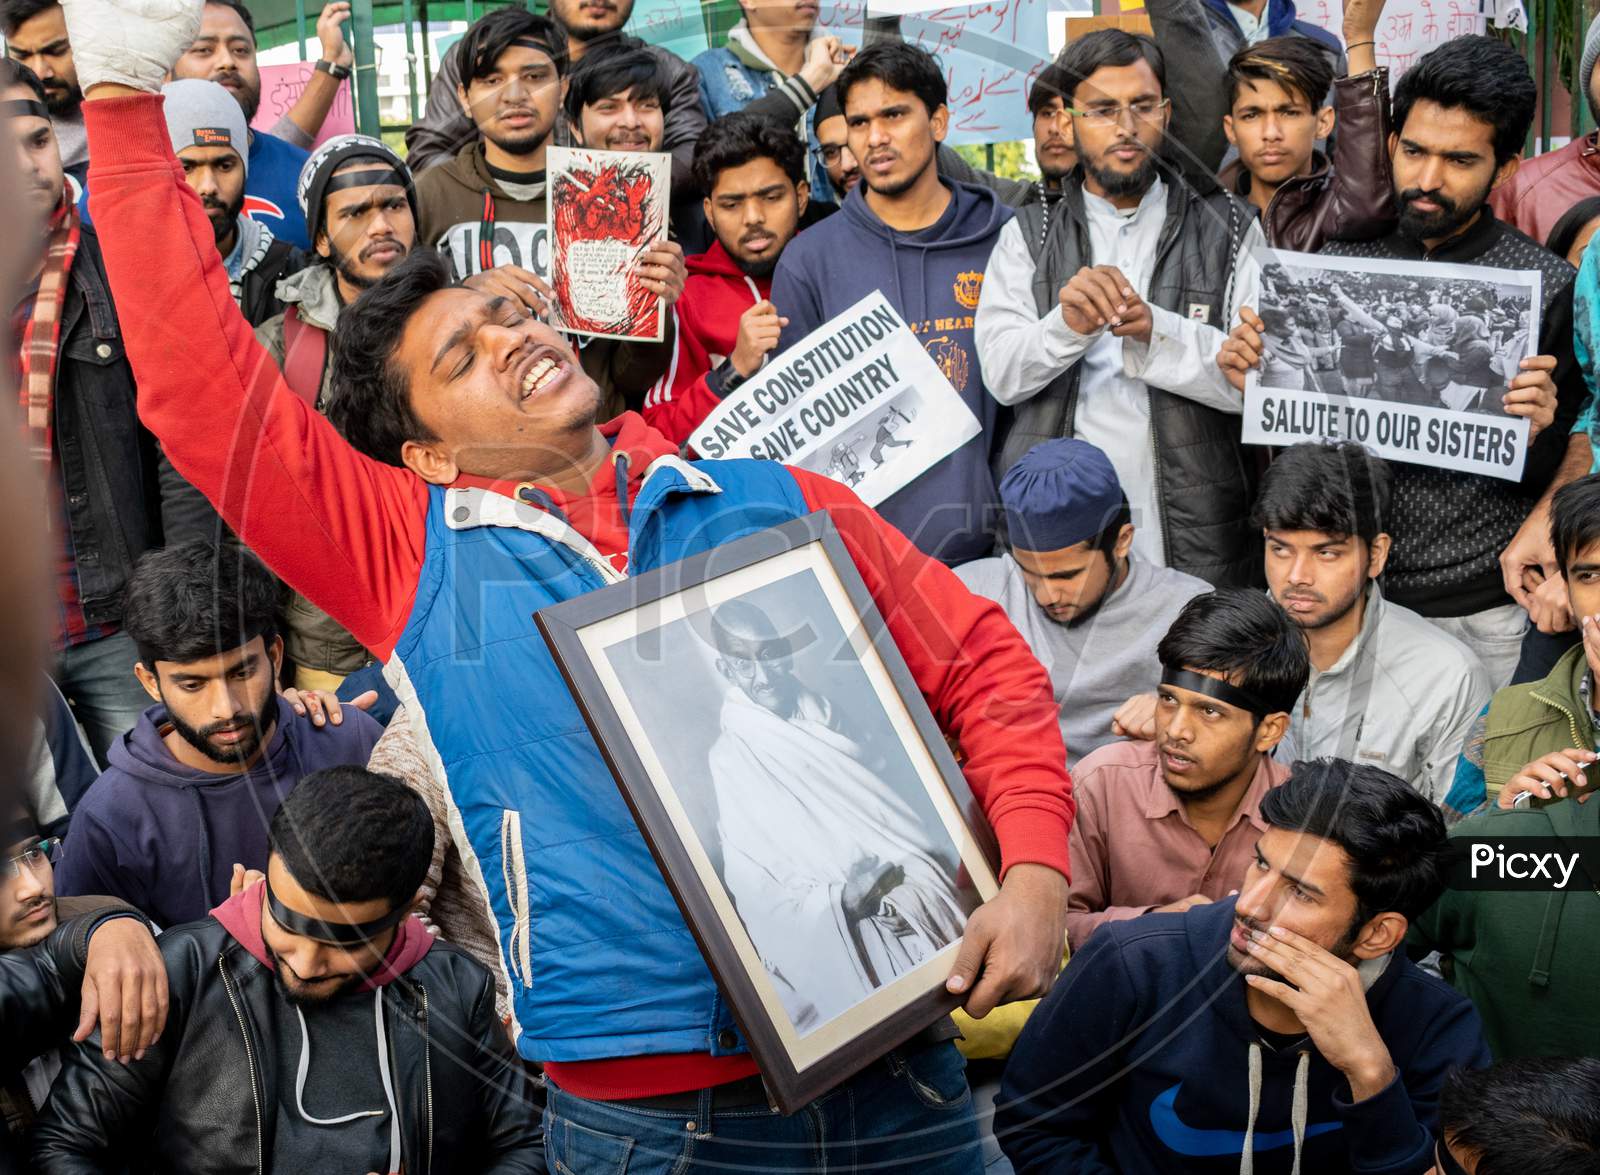 A Student holding picture of Mahatma Gandhi and others holding slogans during protest against CAA and NRC outside Jamia Millia Islamia, A Central University in New Delhi